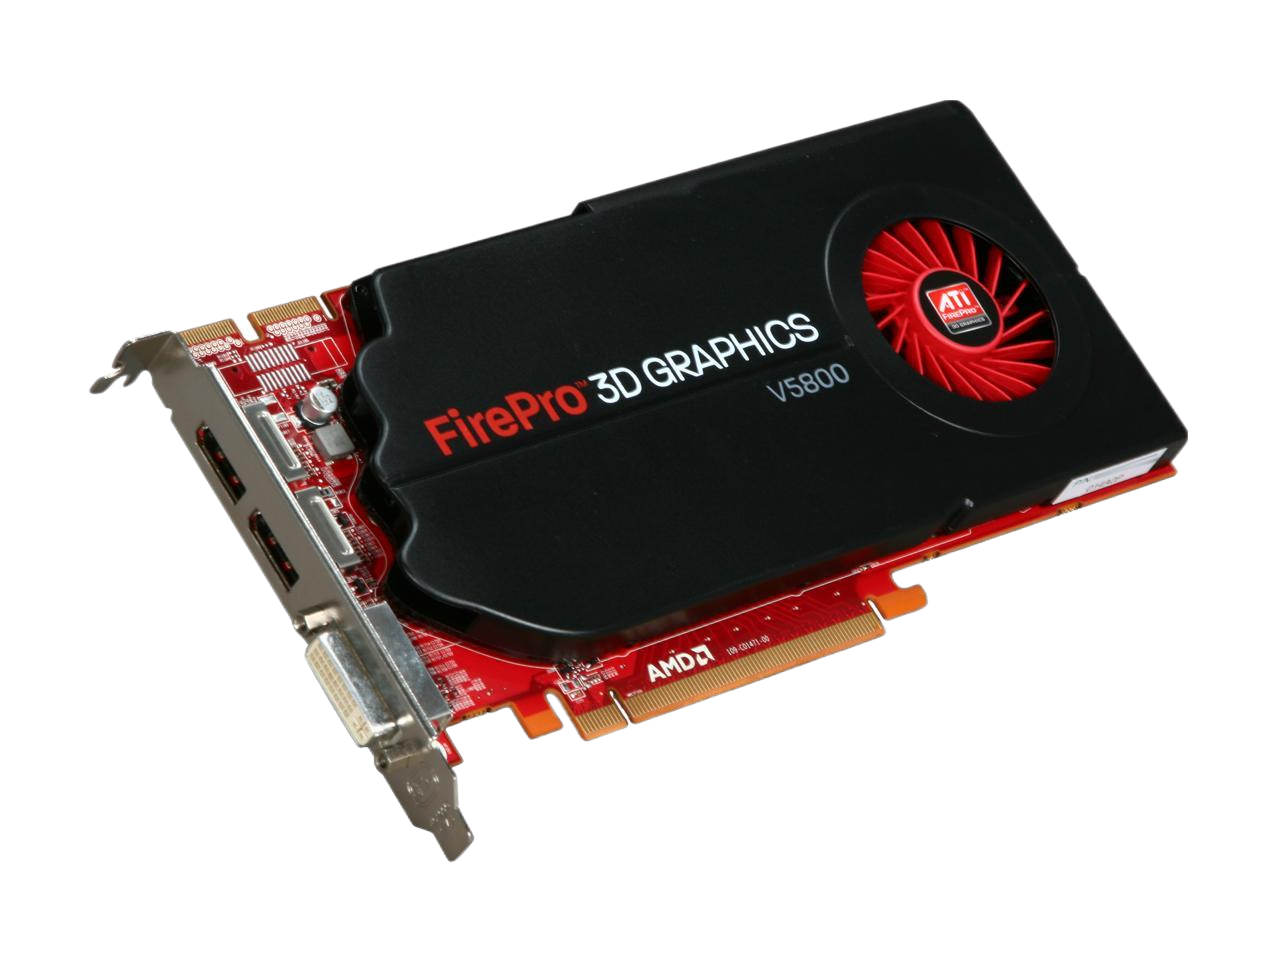 AMD FirePro V5800 1GB GDDR5 128-bit PCI Express 2.1 x16 Full Height Video Card with Rear Bracket Workstation Graphics Card 641329912102